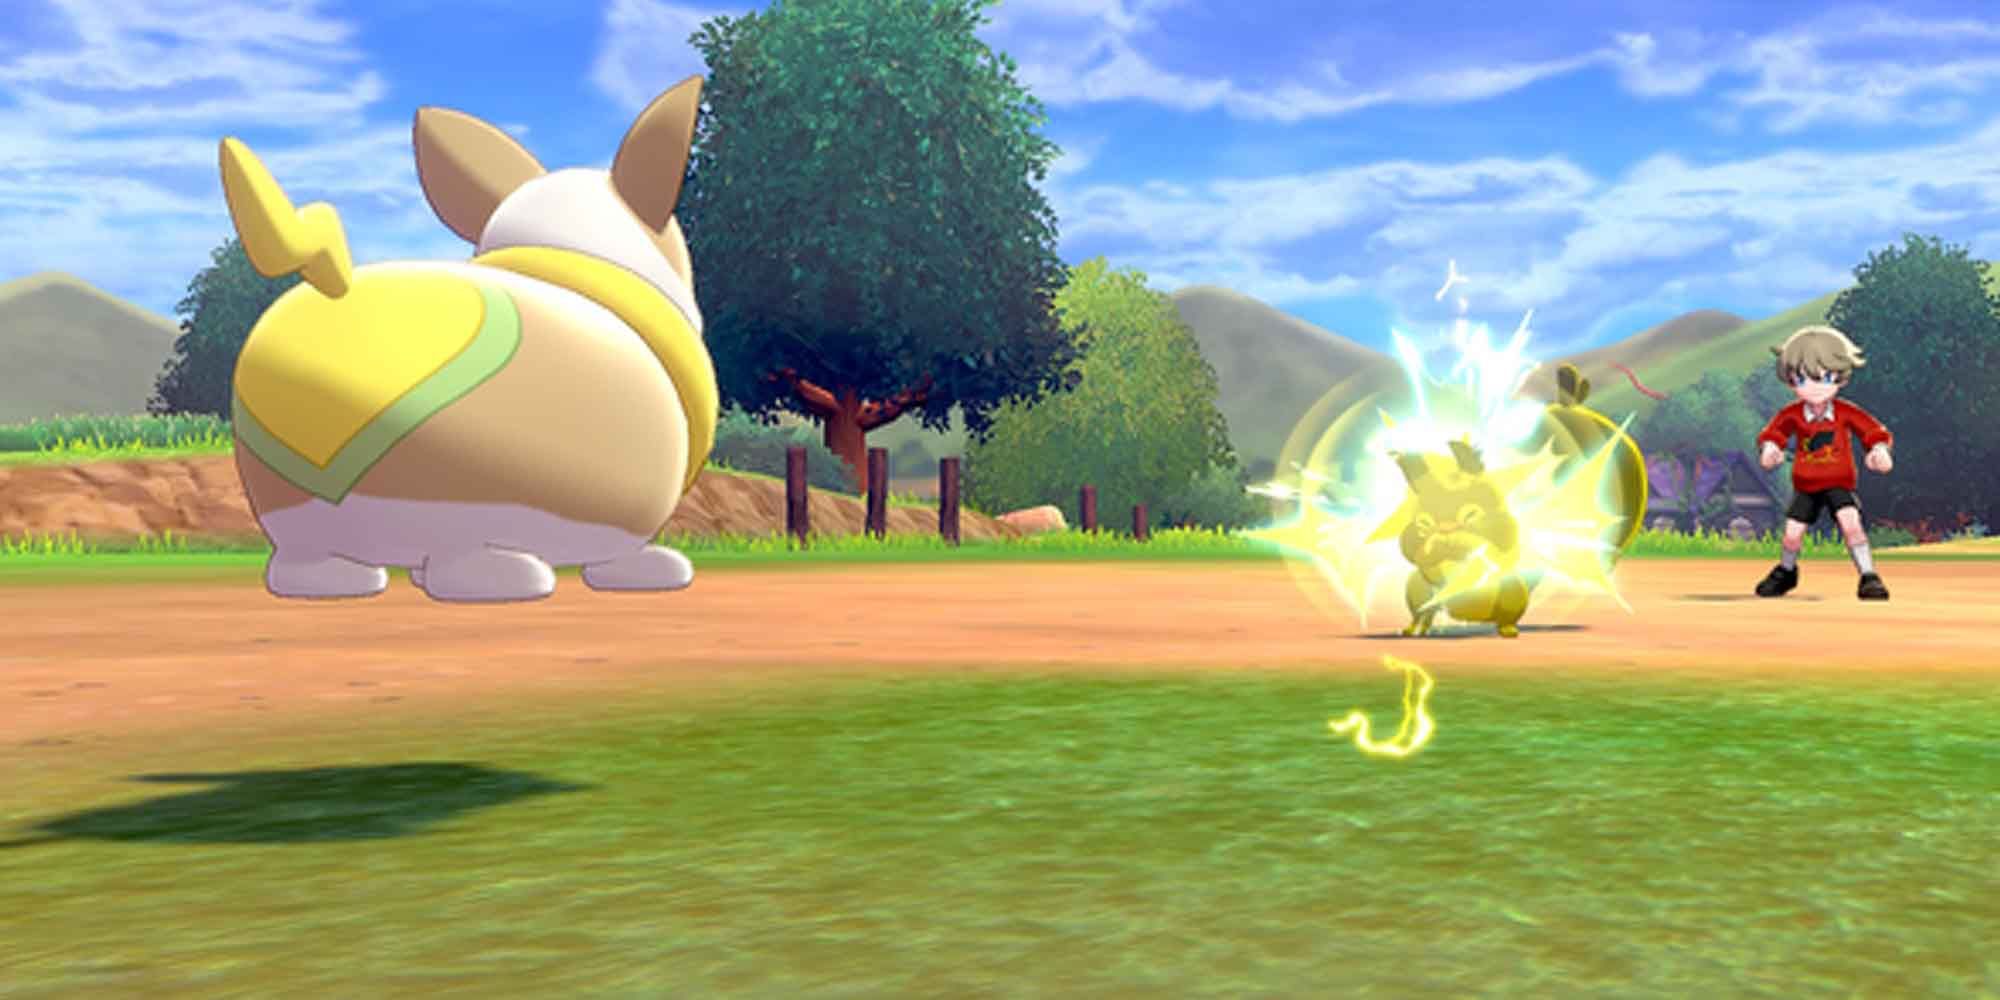 Using the Electric Nuzzle move in Pokemon: Sword and Shield